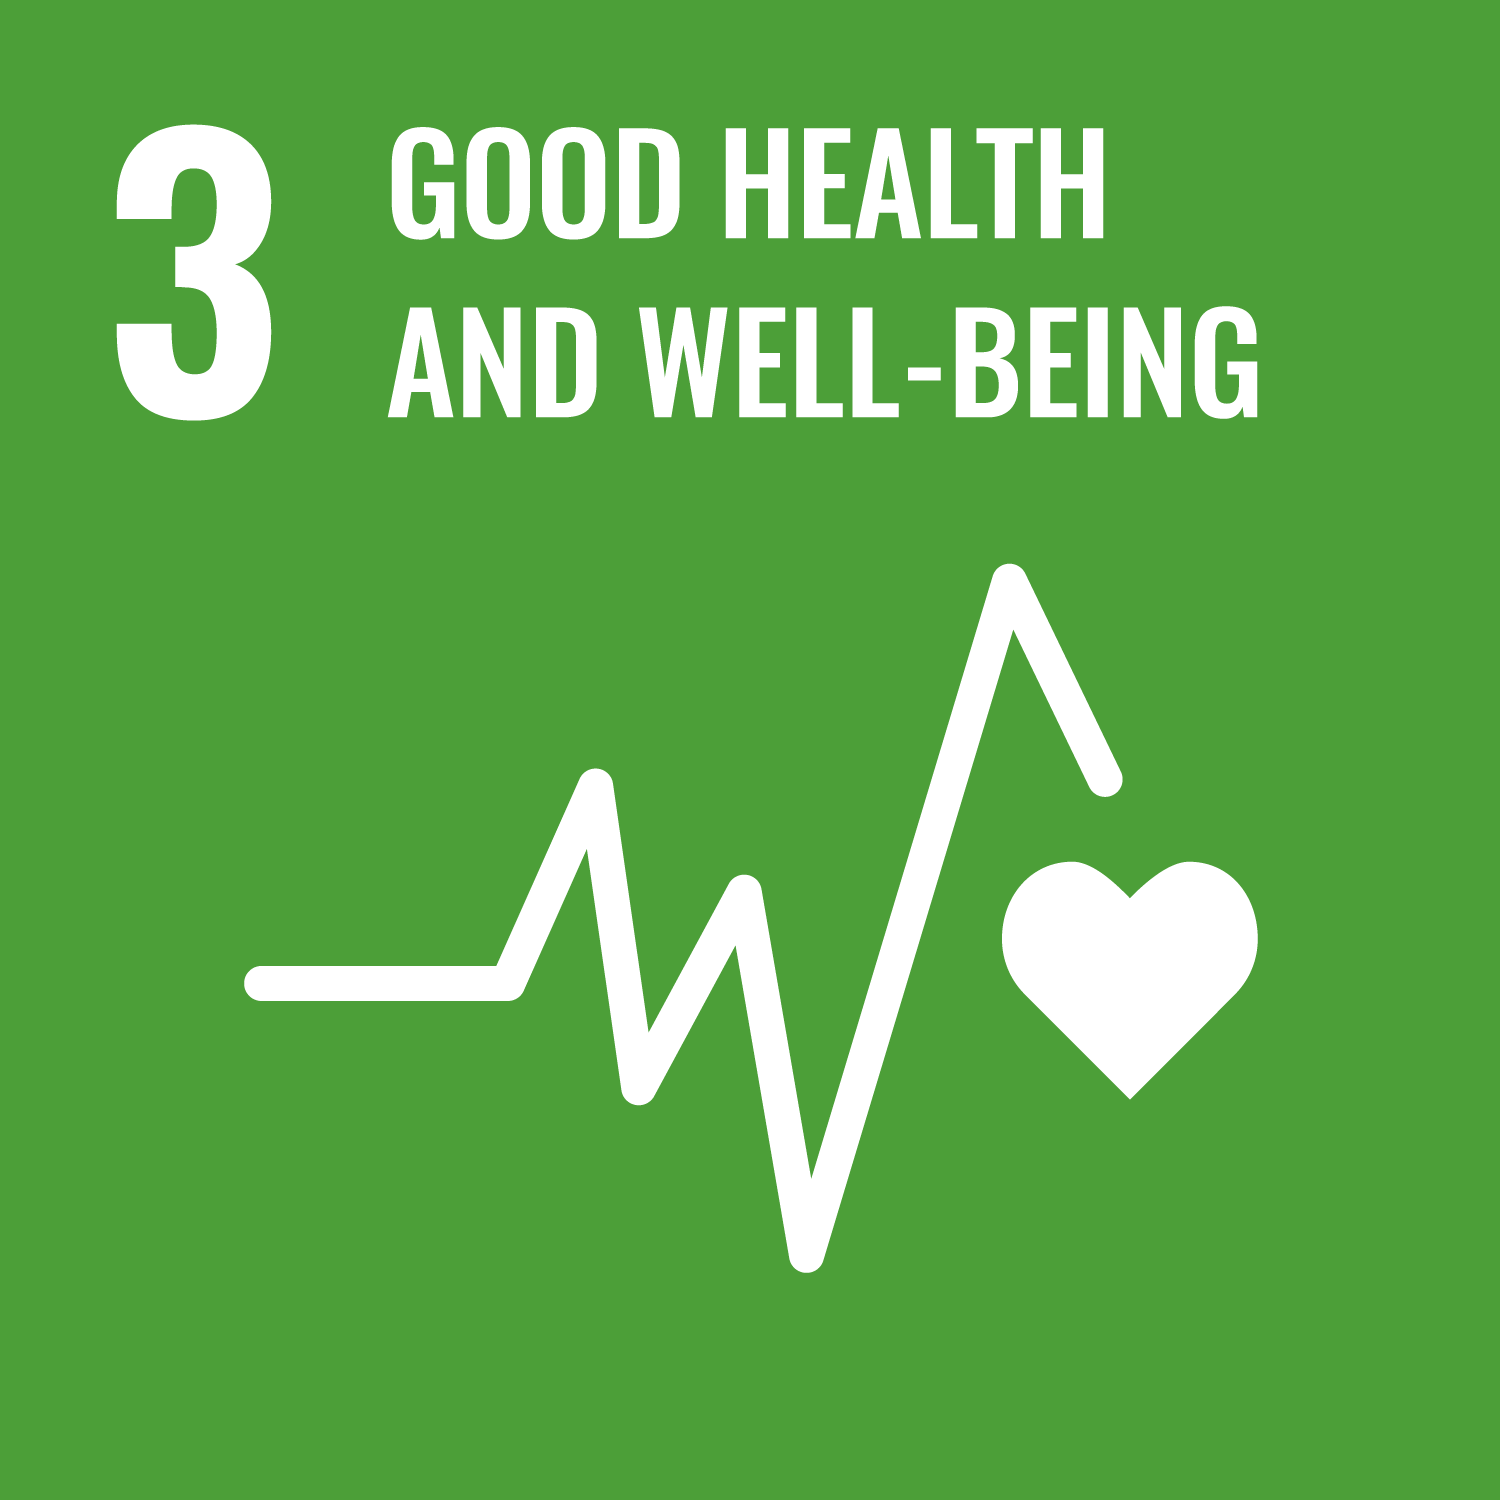 UN Sustainable Development Goal 3 - Good Health and Well-Being